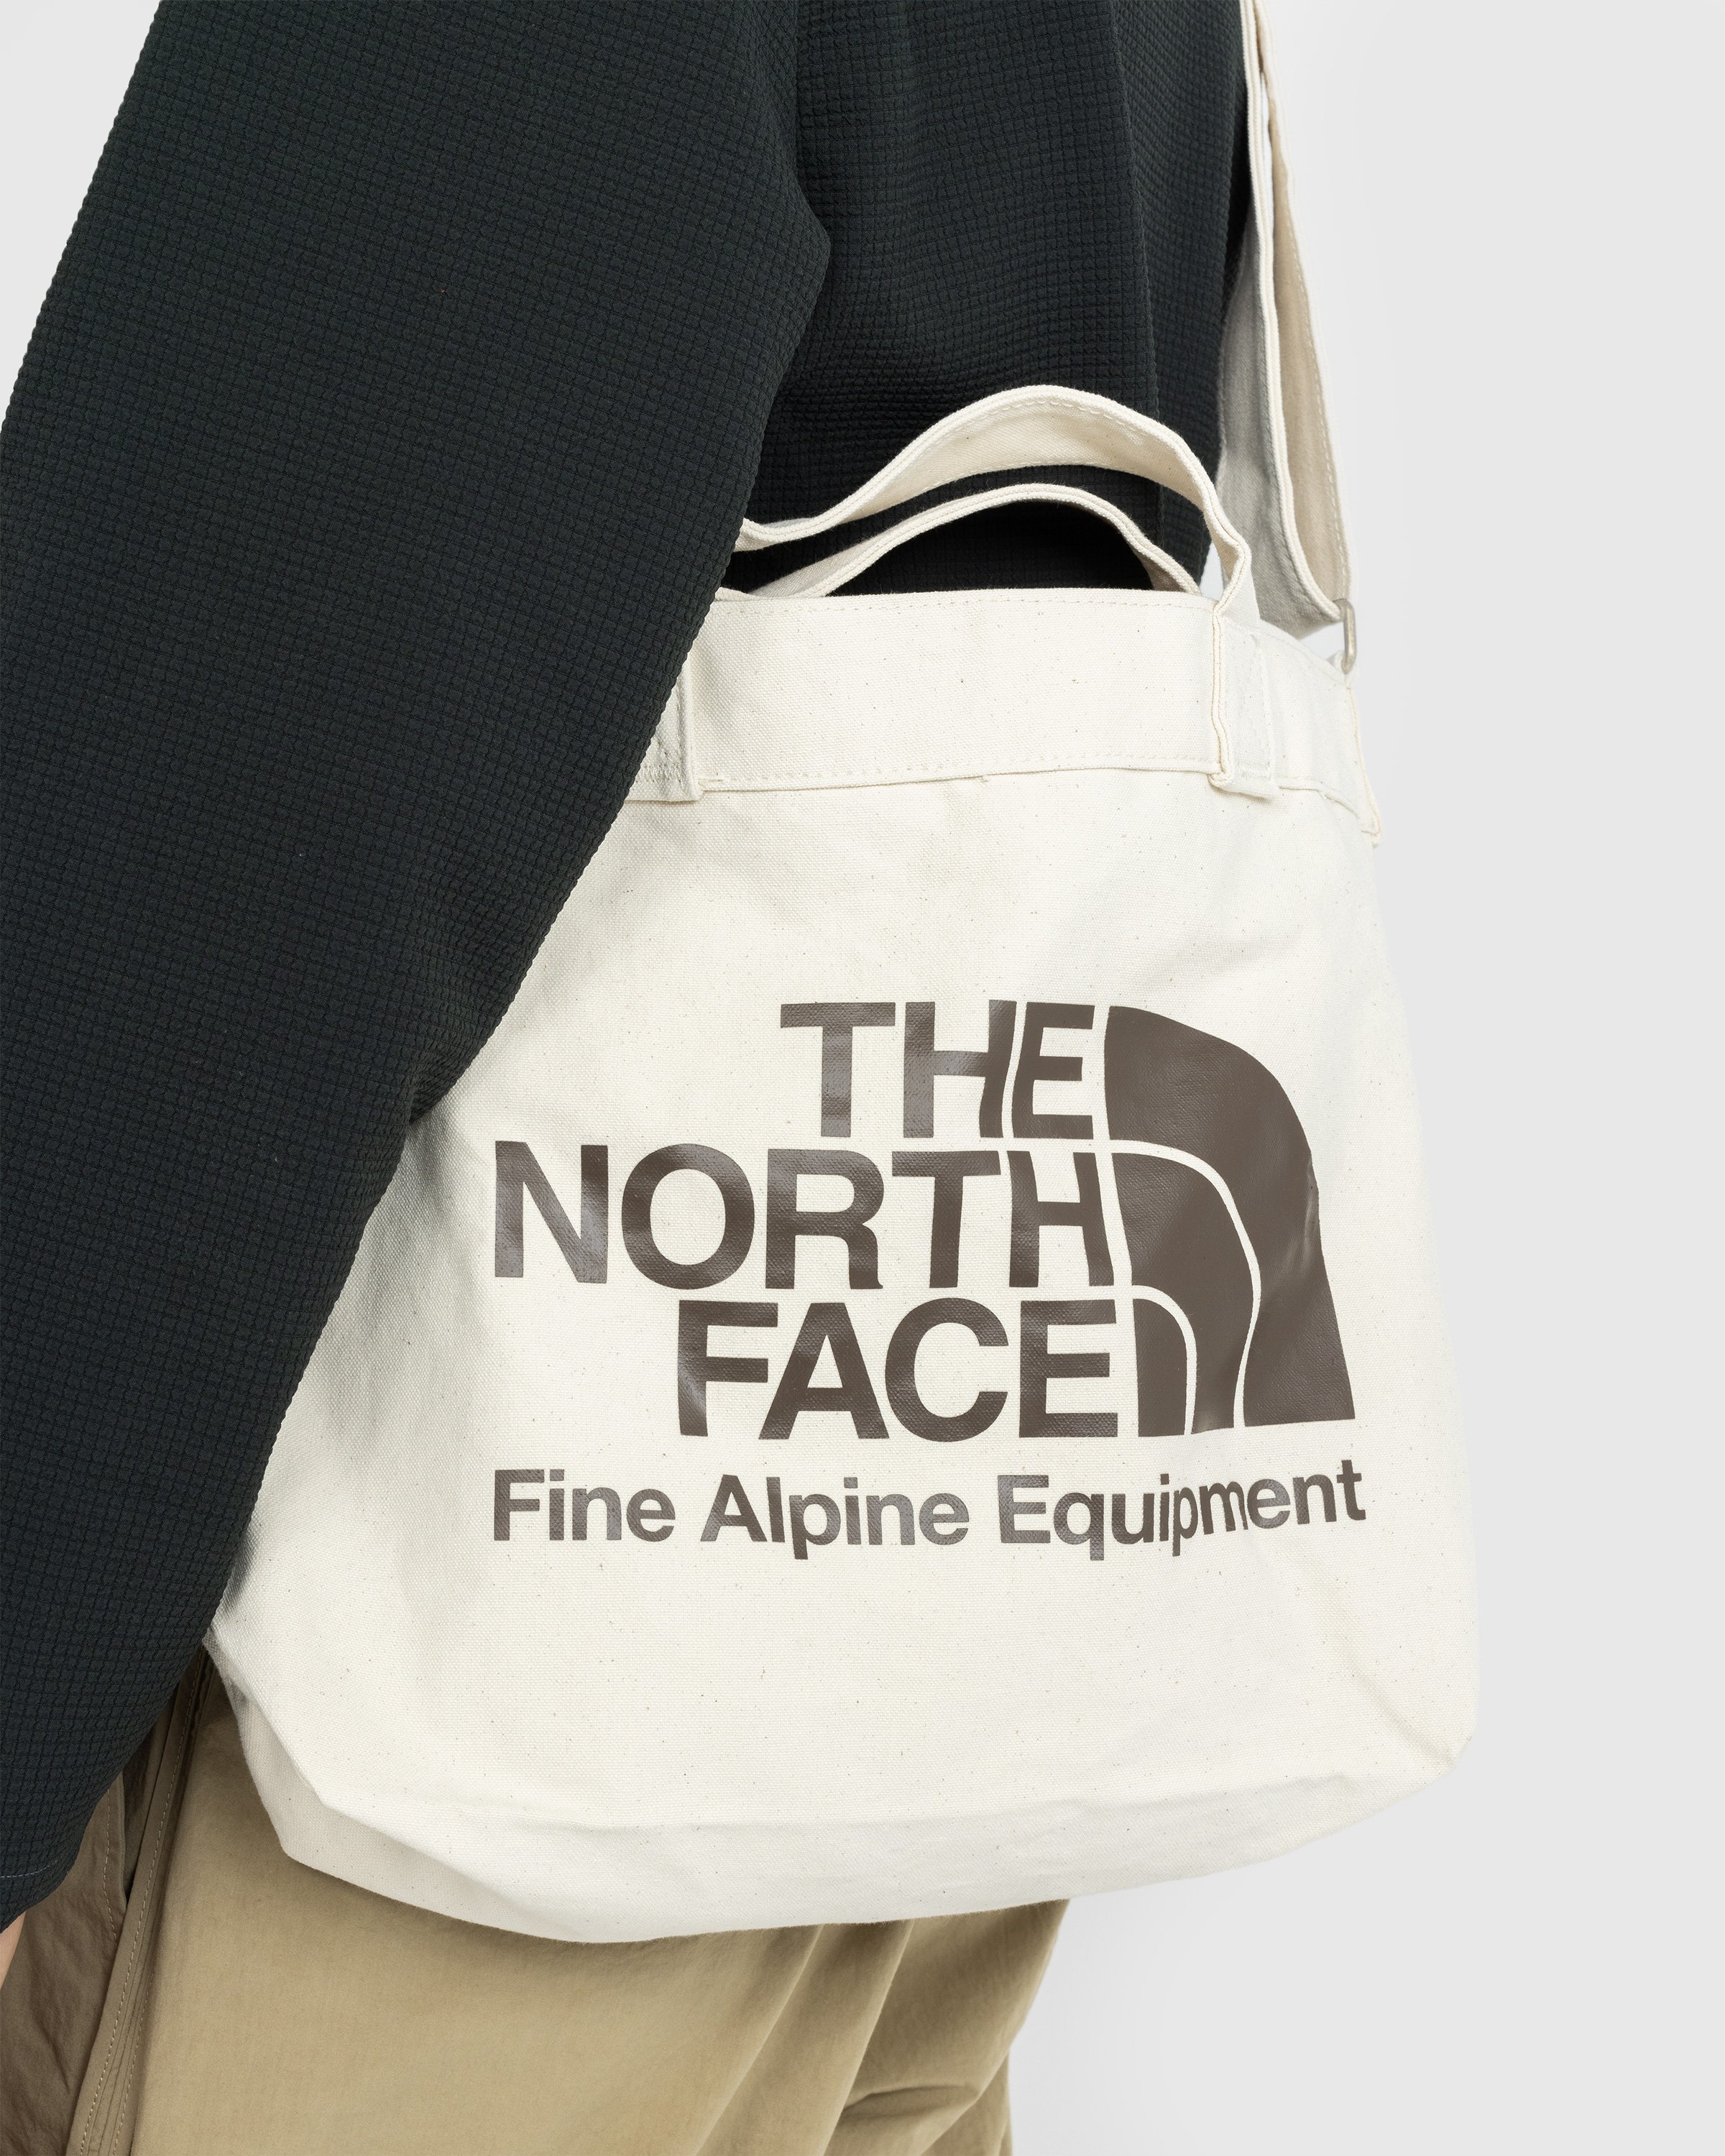 The North Face - Adjustable Cotton Tote Bag Beige - Accessories - Multi - Image 4